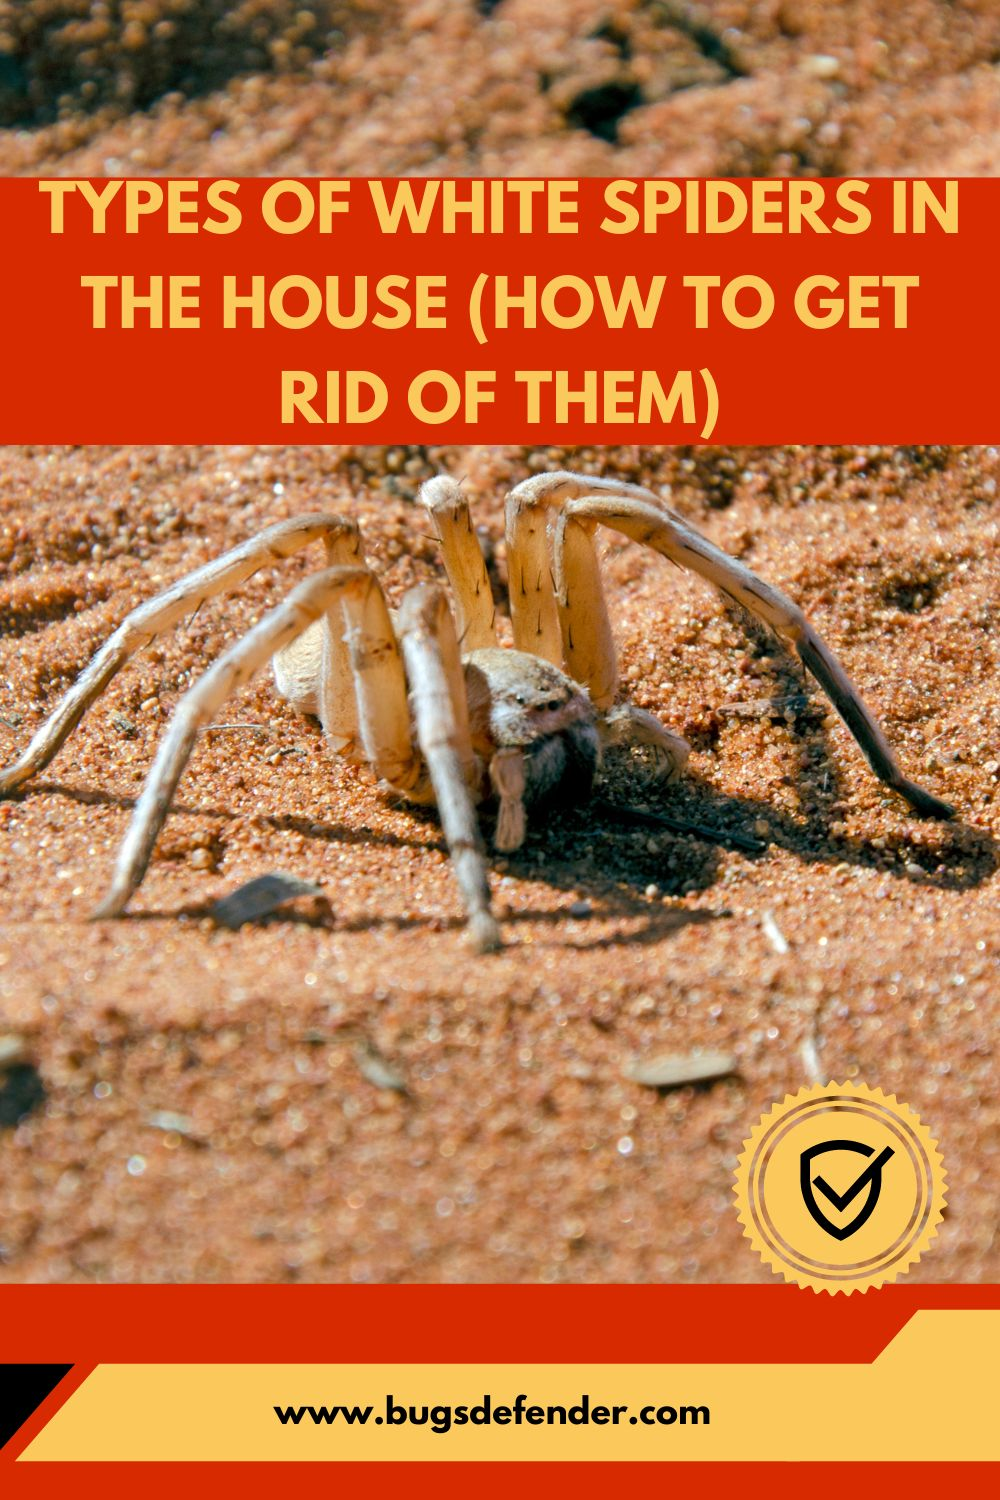 Types of White Spiders in the House (And How to Get Rid of Them)